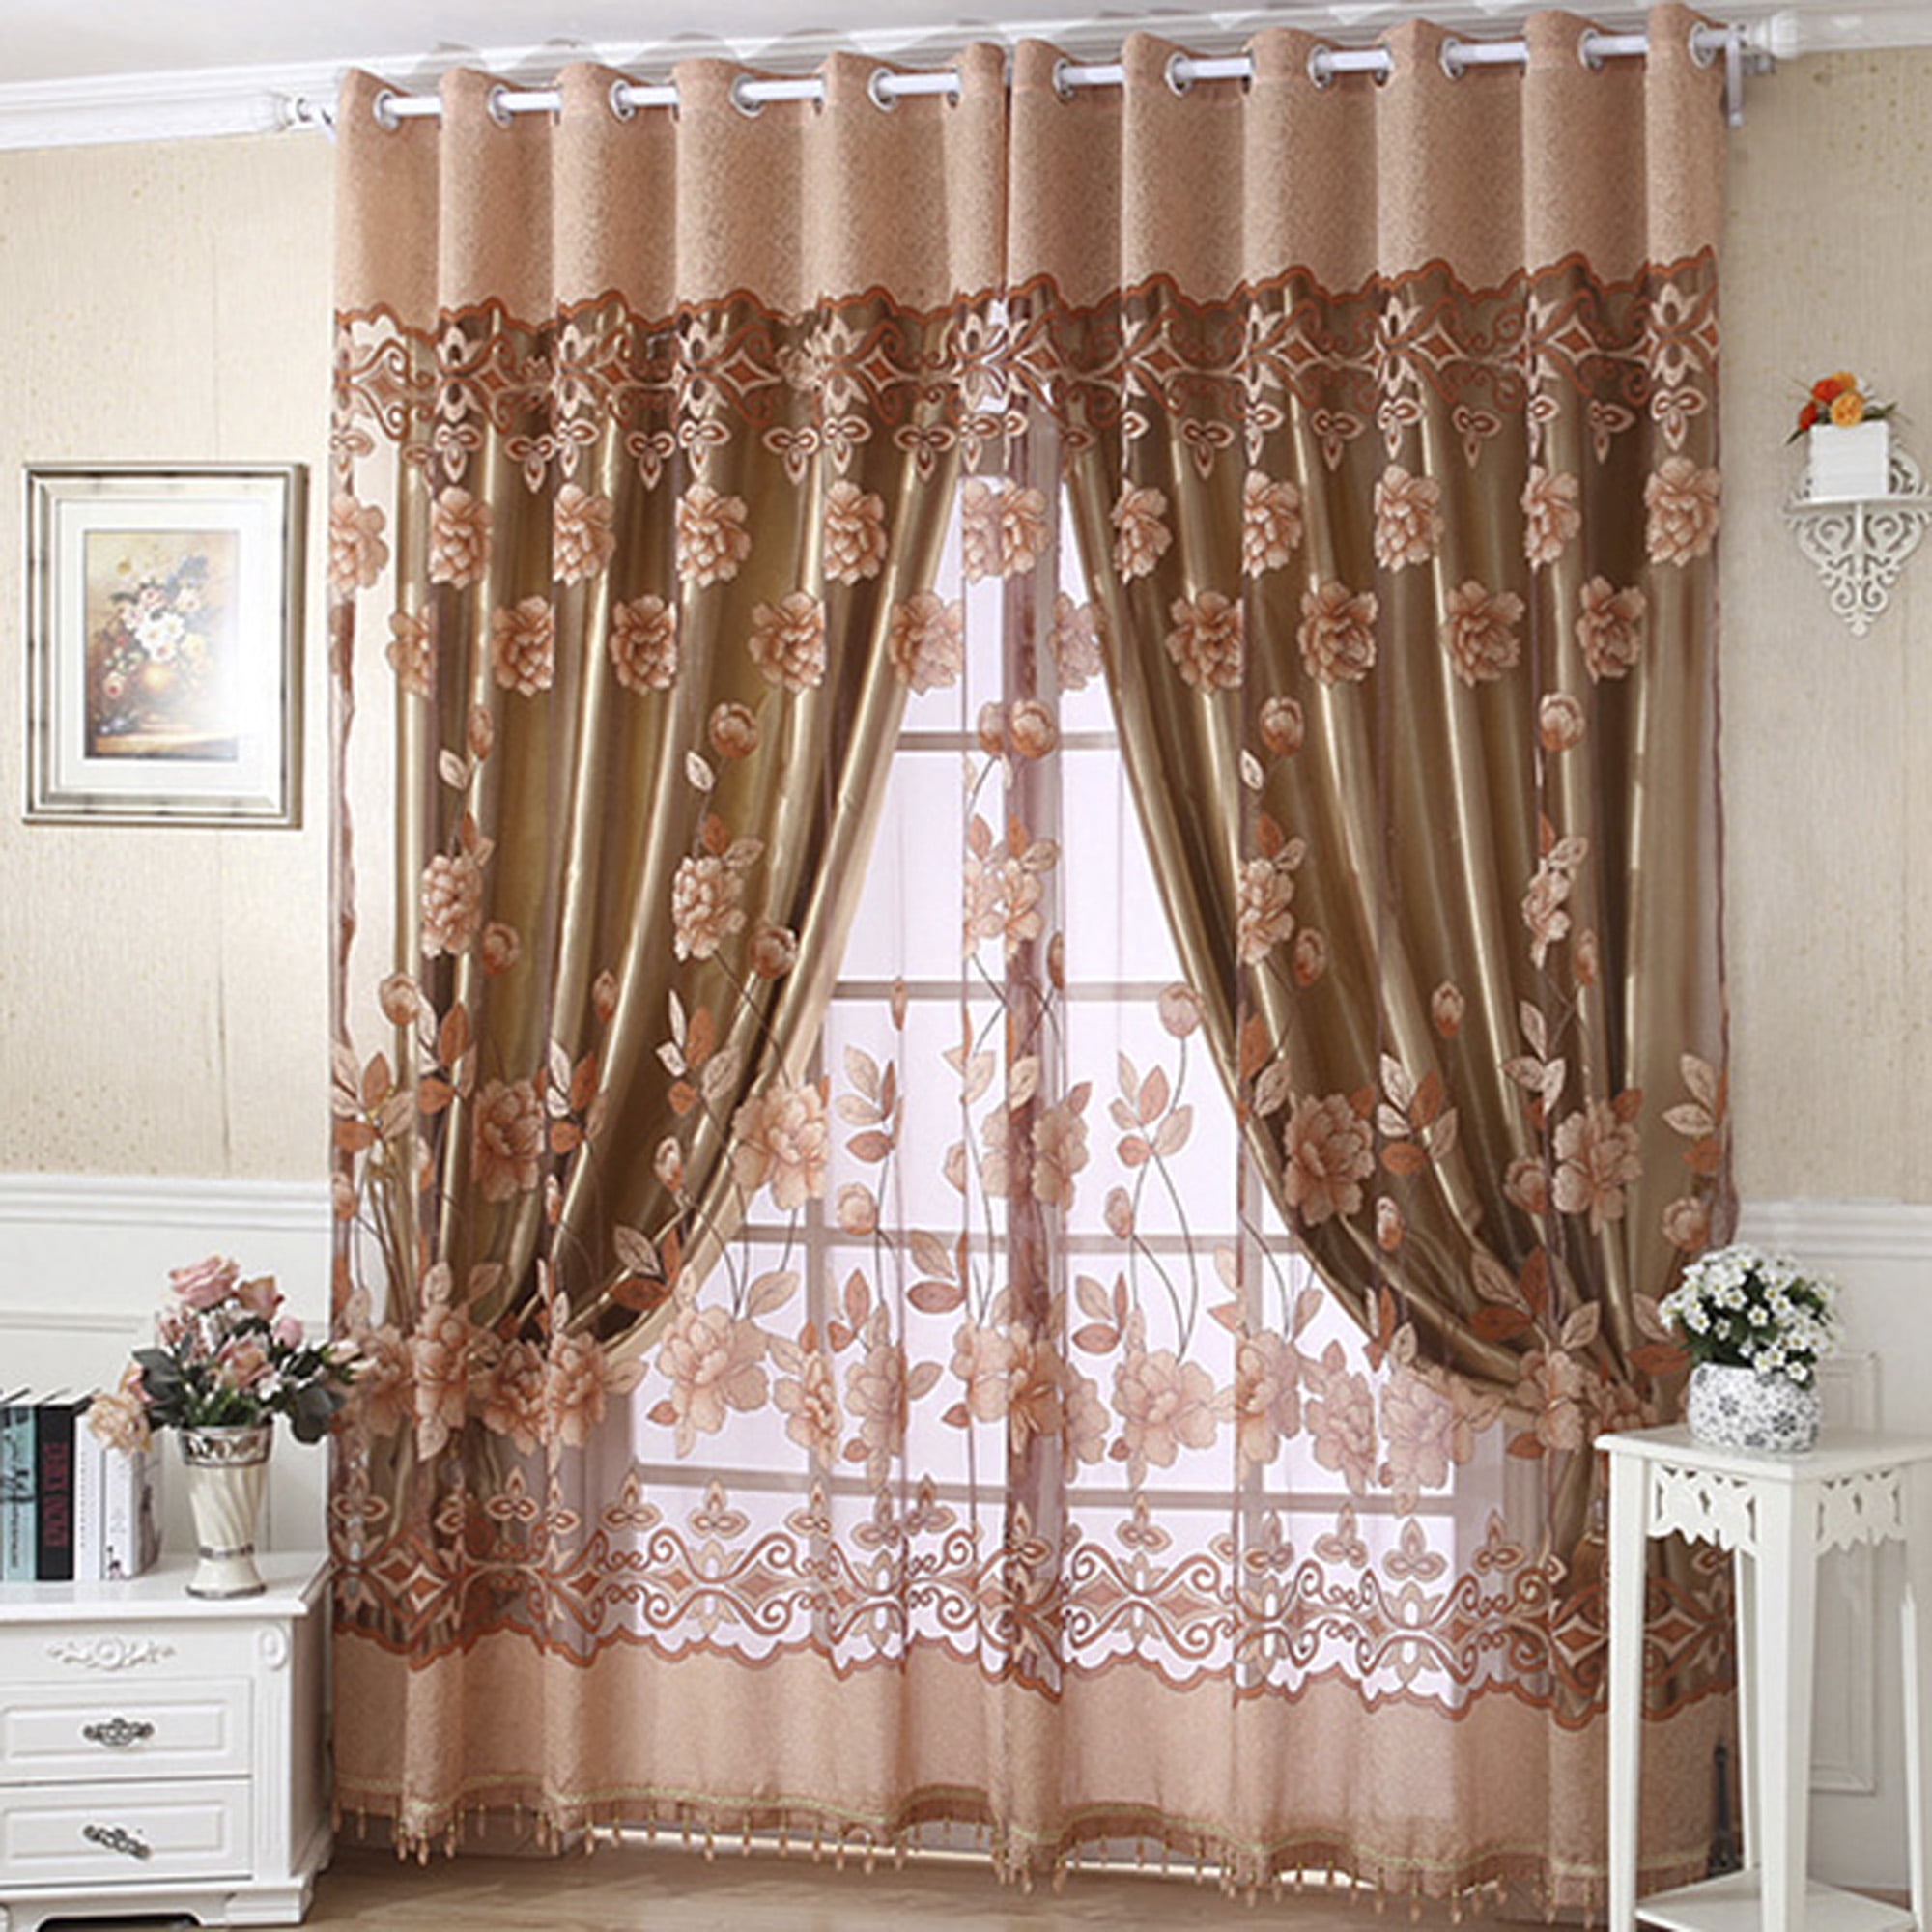 Floral Tulle Voile 54"*72" Door Window Curtain Drape Panel Sheer Scarf Valances 